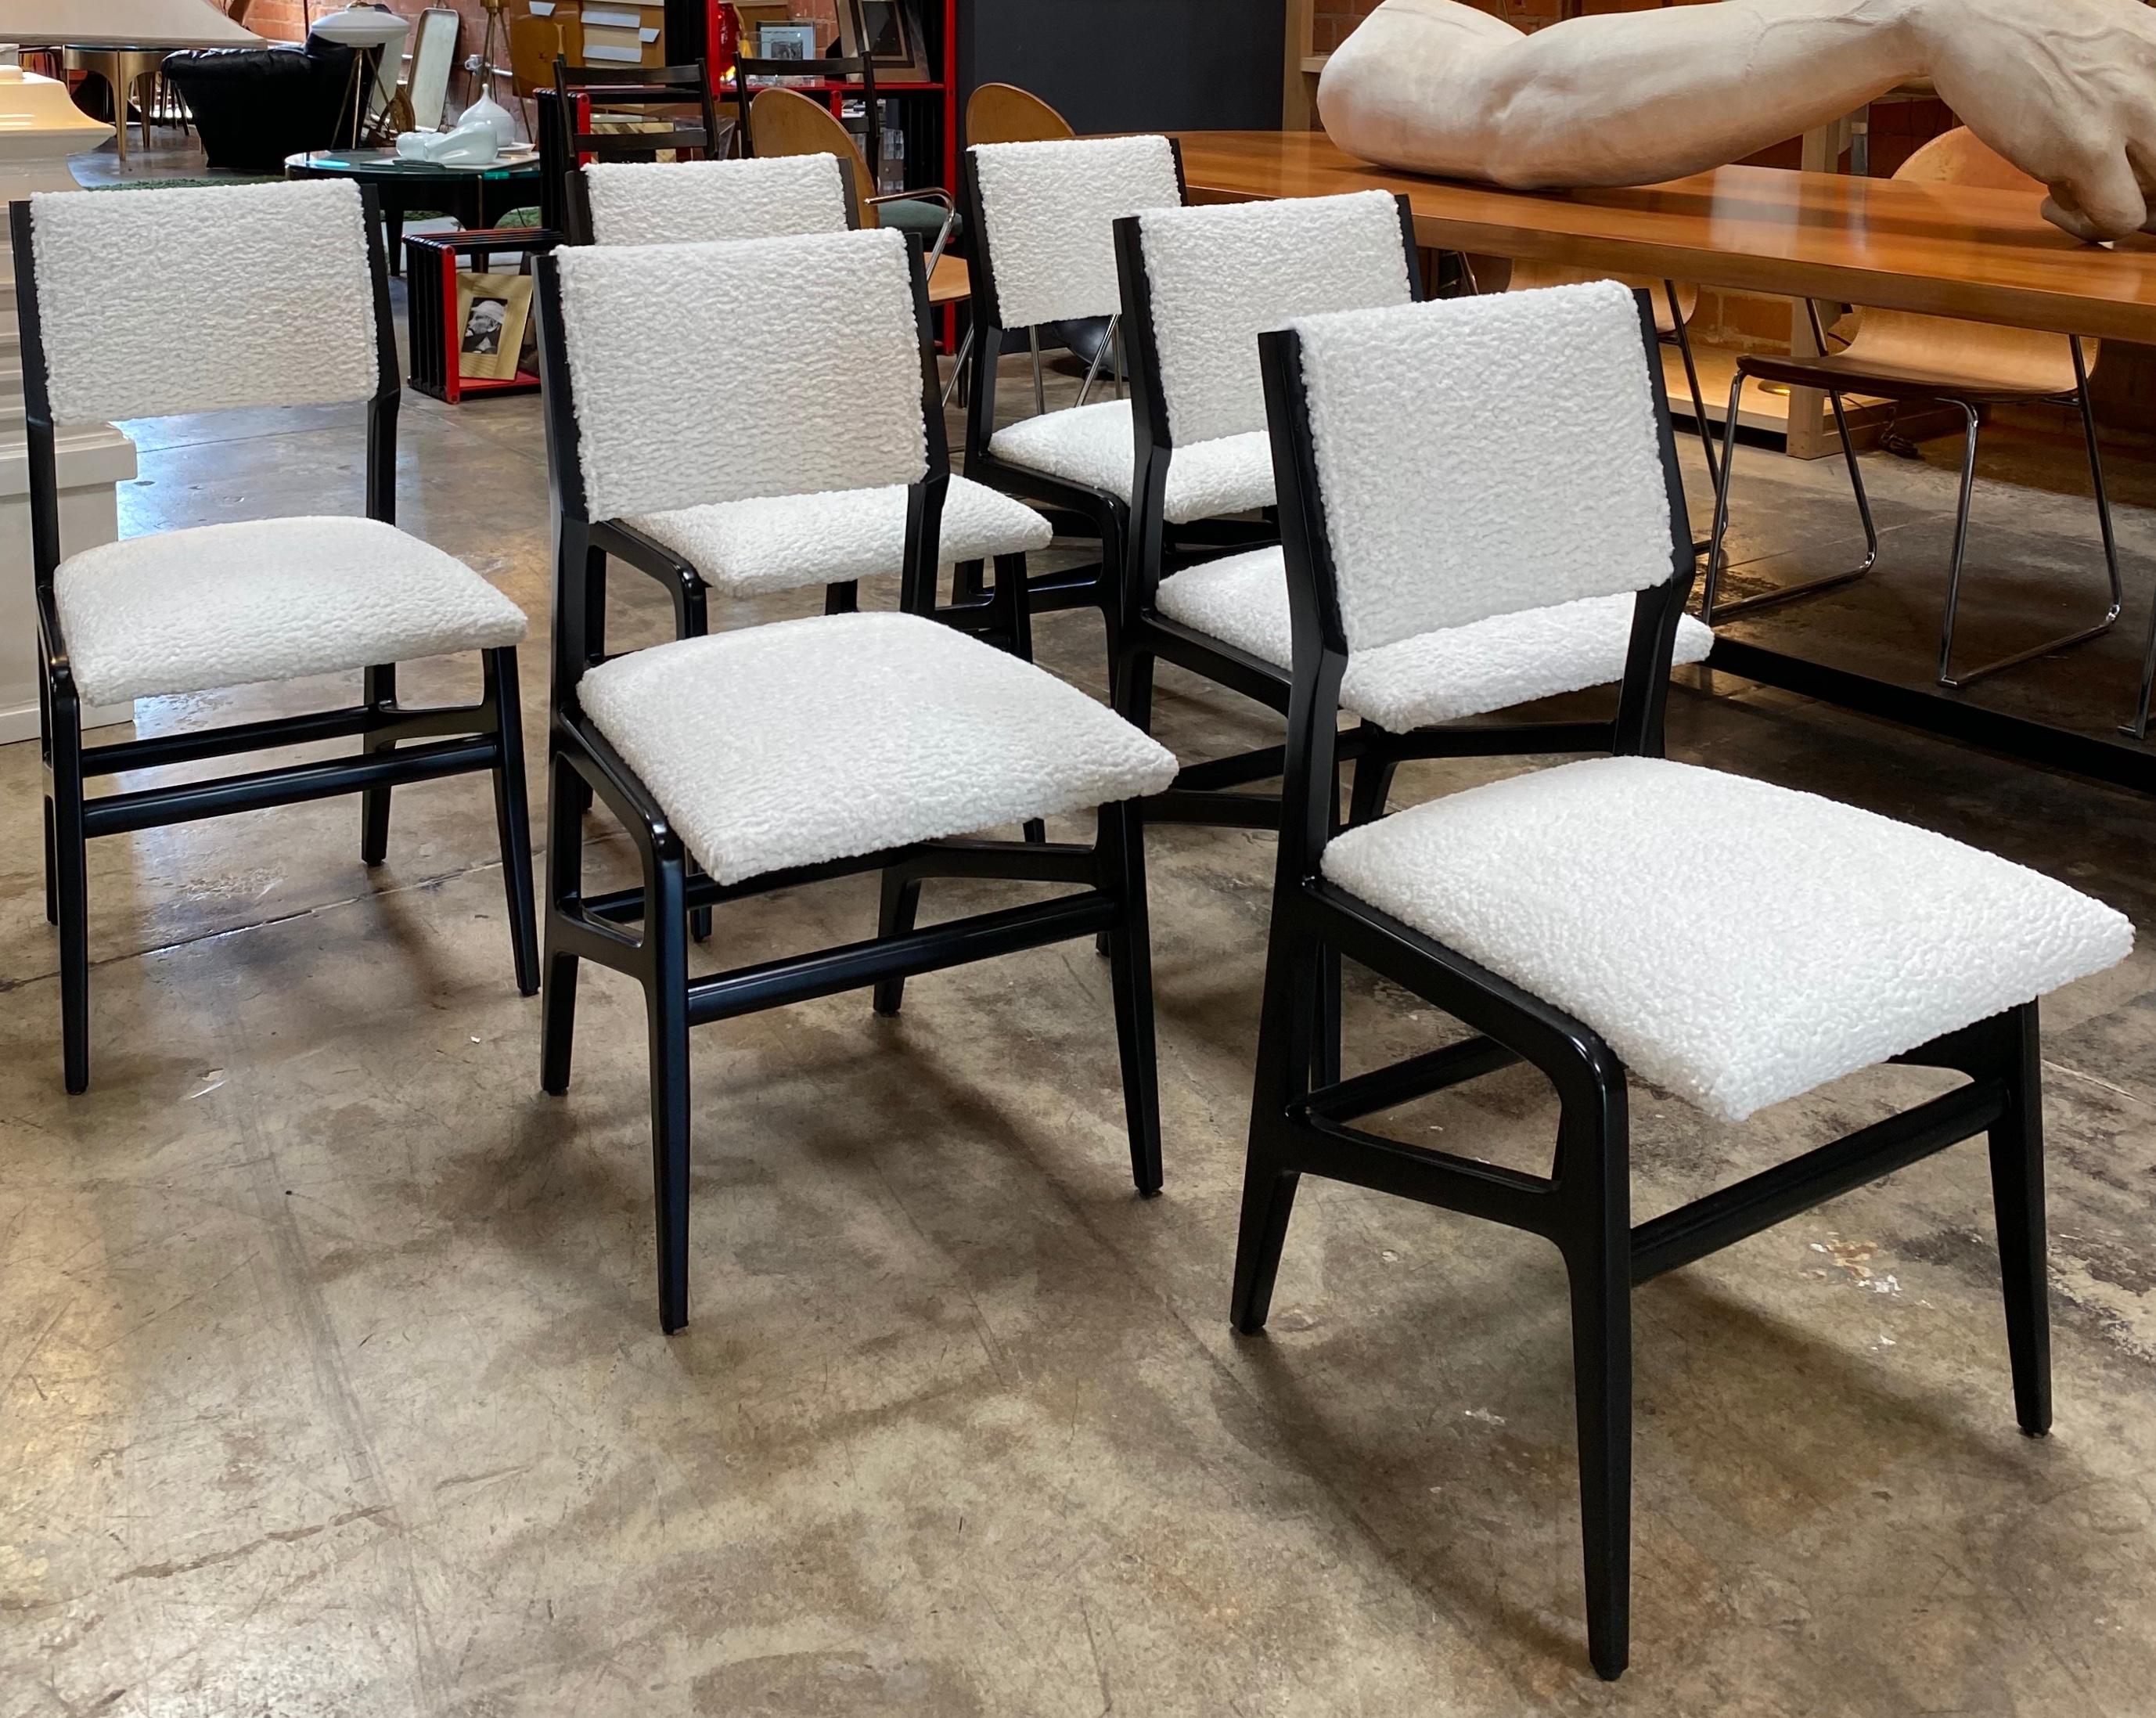 An elegant and timeless design.
Made of Italian black wood with sensuous lines and new chic white sheep wool textured upholstery.
The wood has been refinished without taking away from its' historical integrity.
These chairs, with their organic